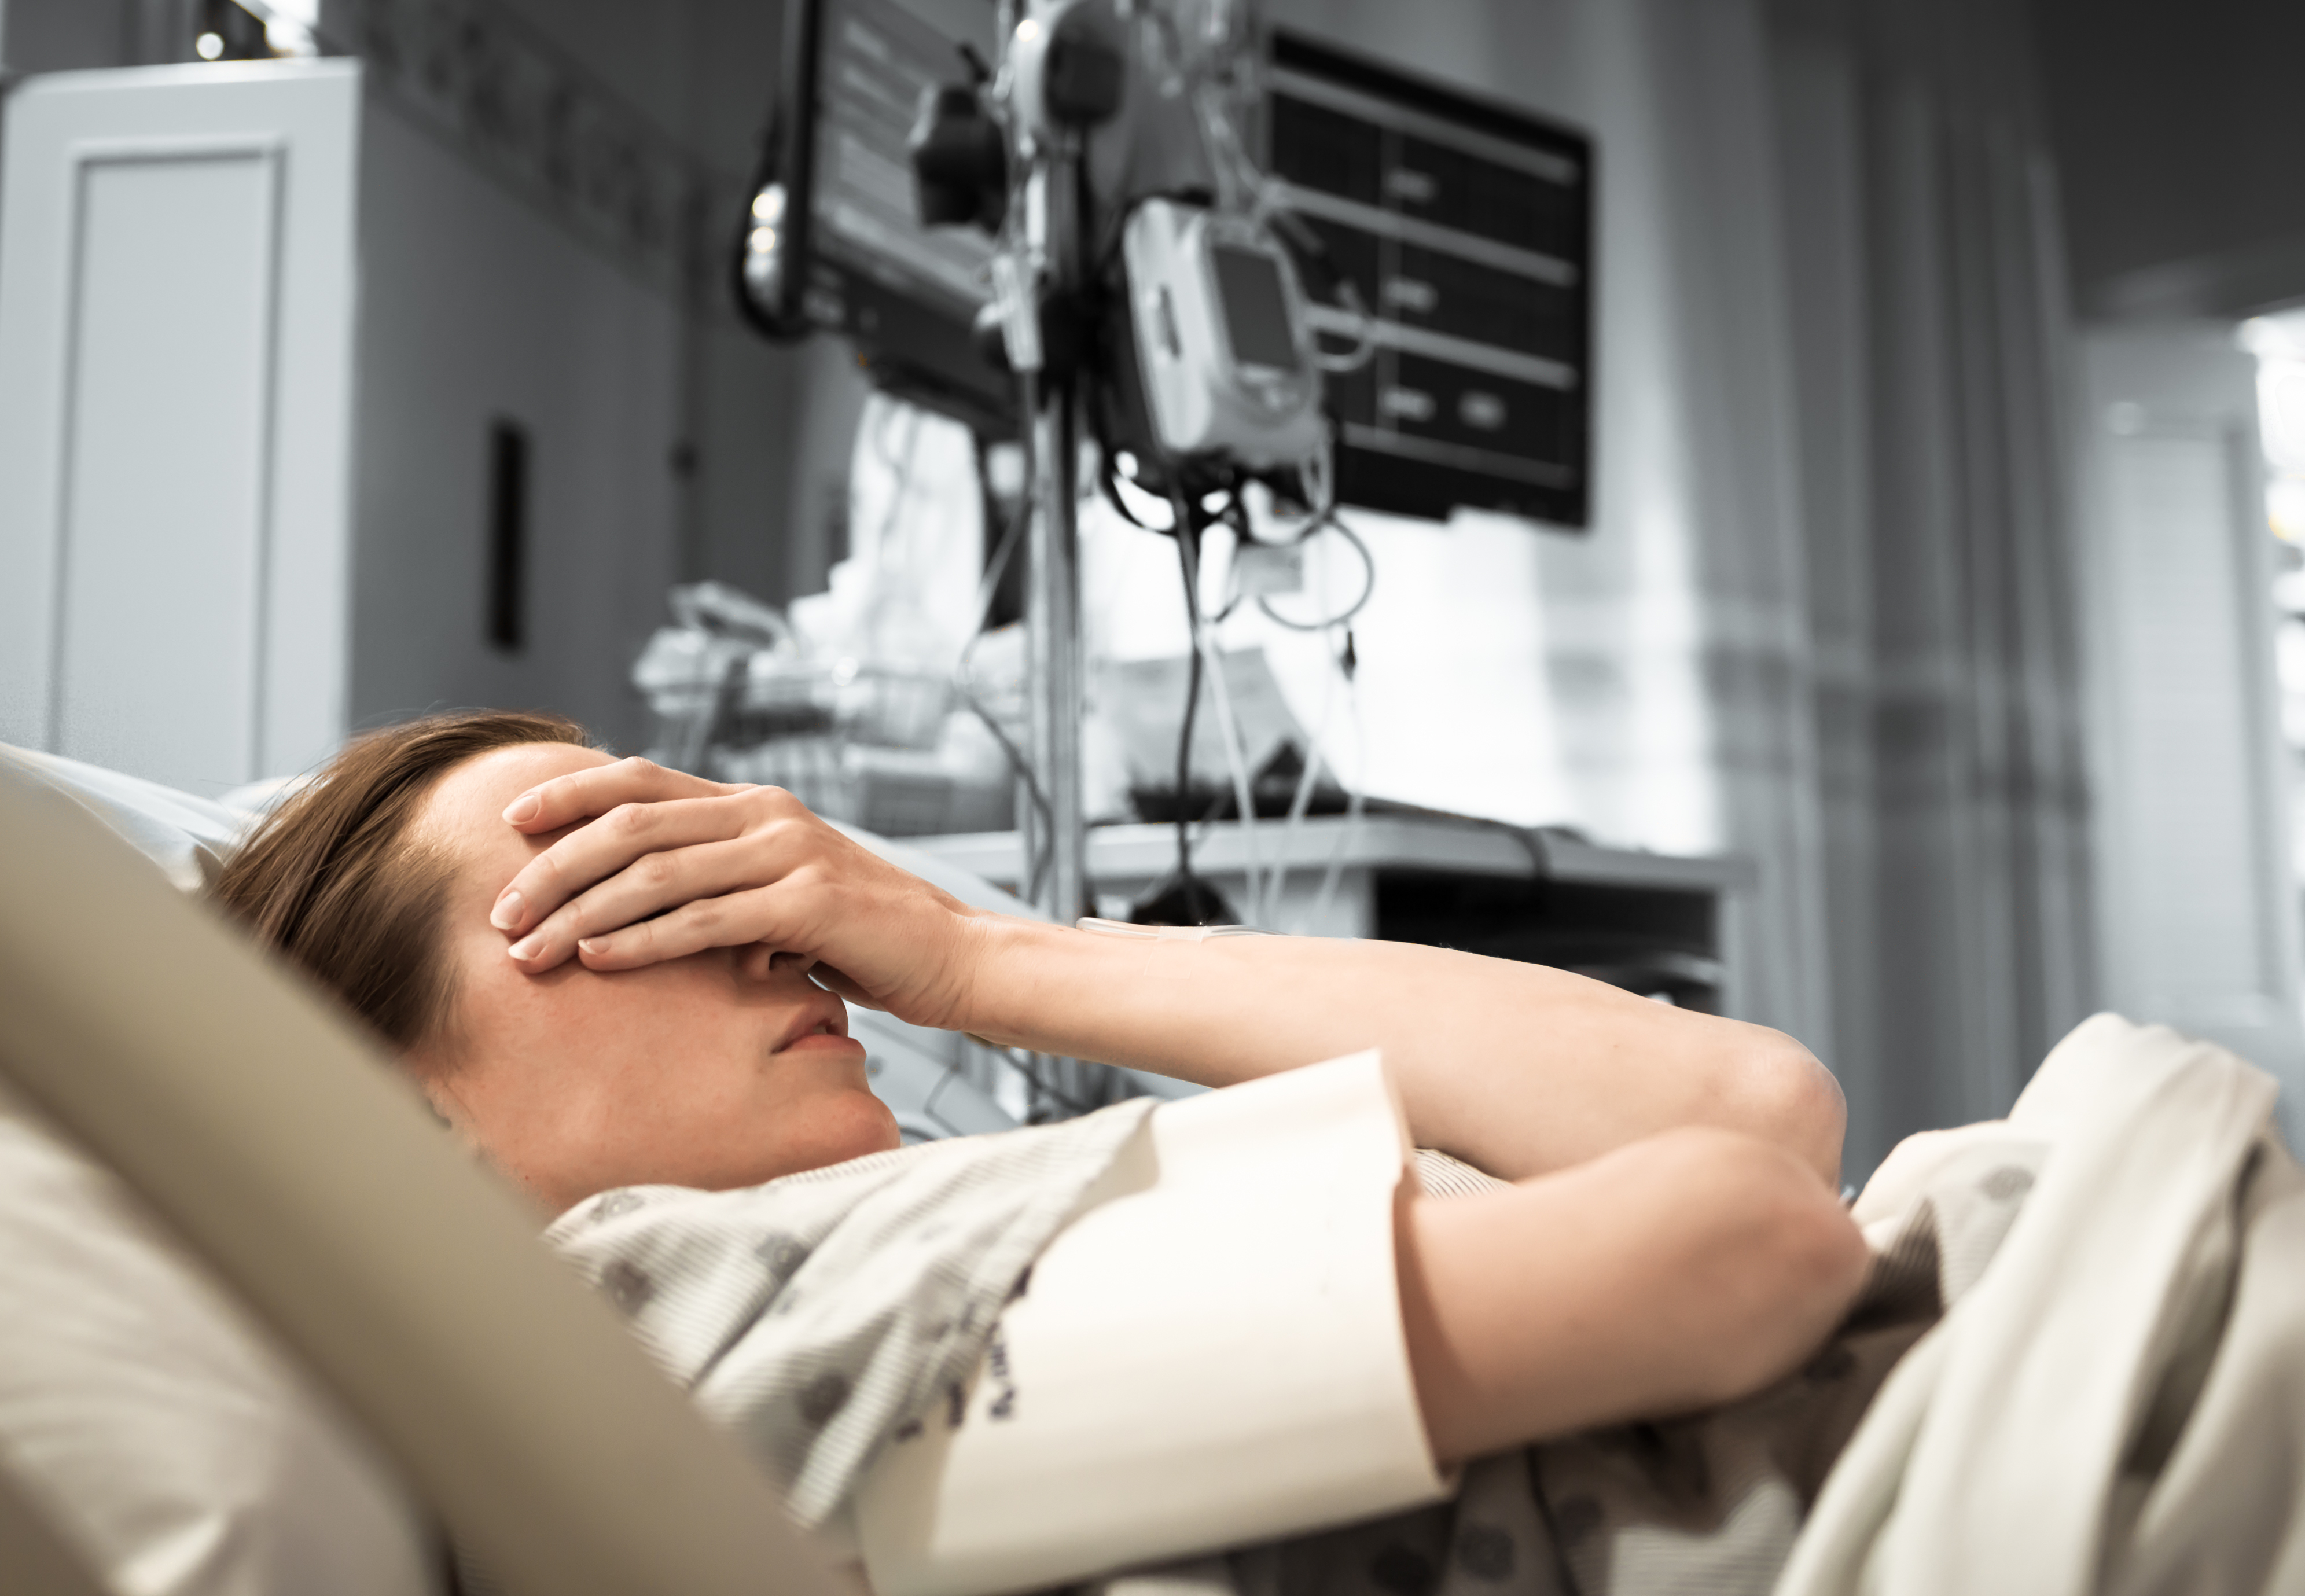 A sick woman in a hospital bed. | Source: Shutterstock